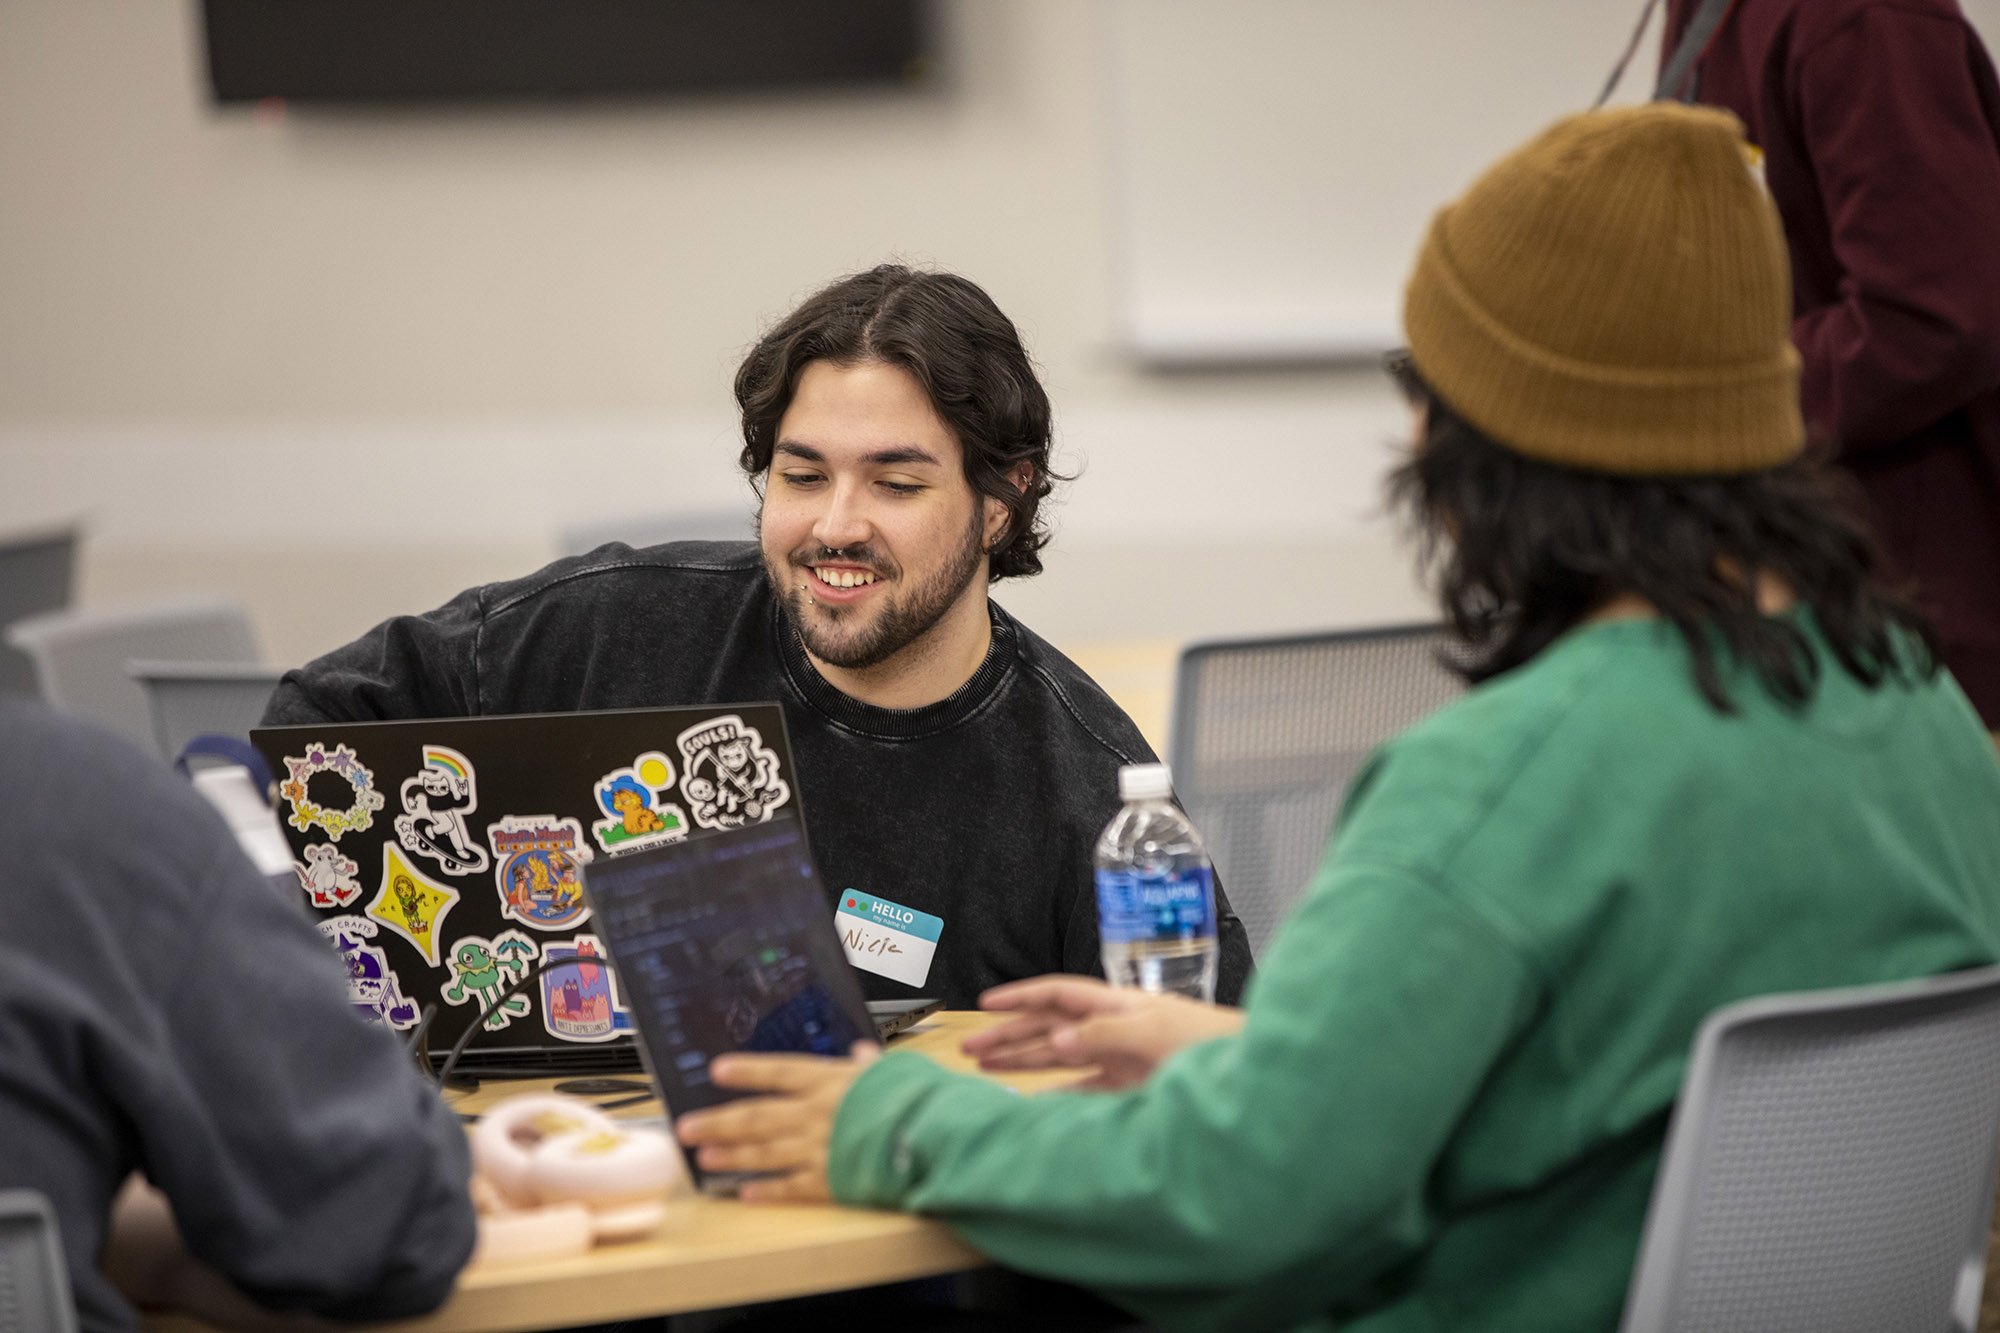 UAlbany students host the University's first-ever hackathon at the ETEC building on April 13, 2024.